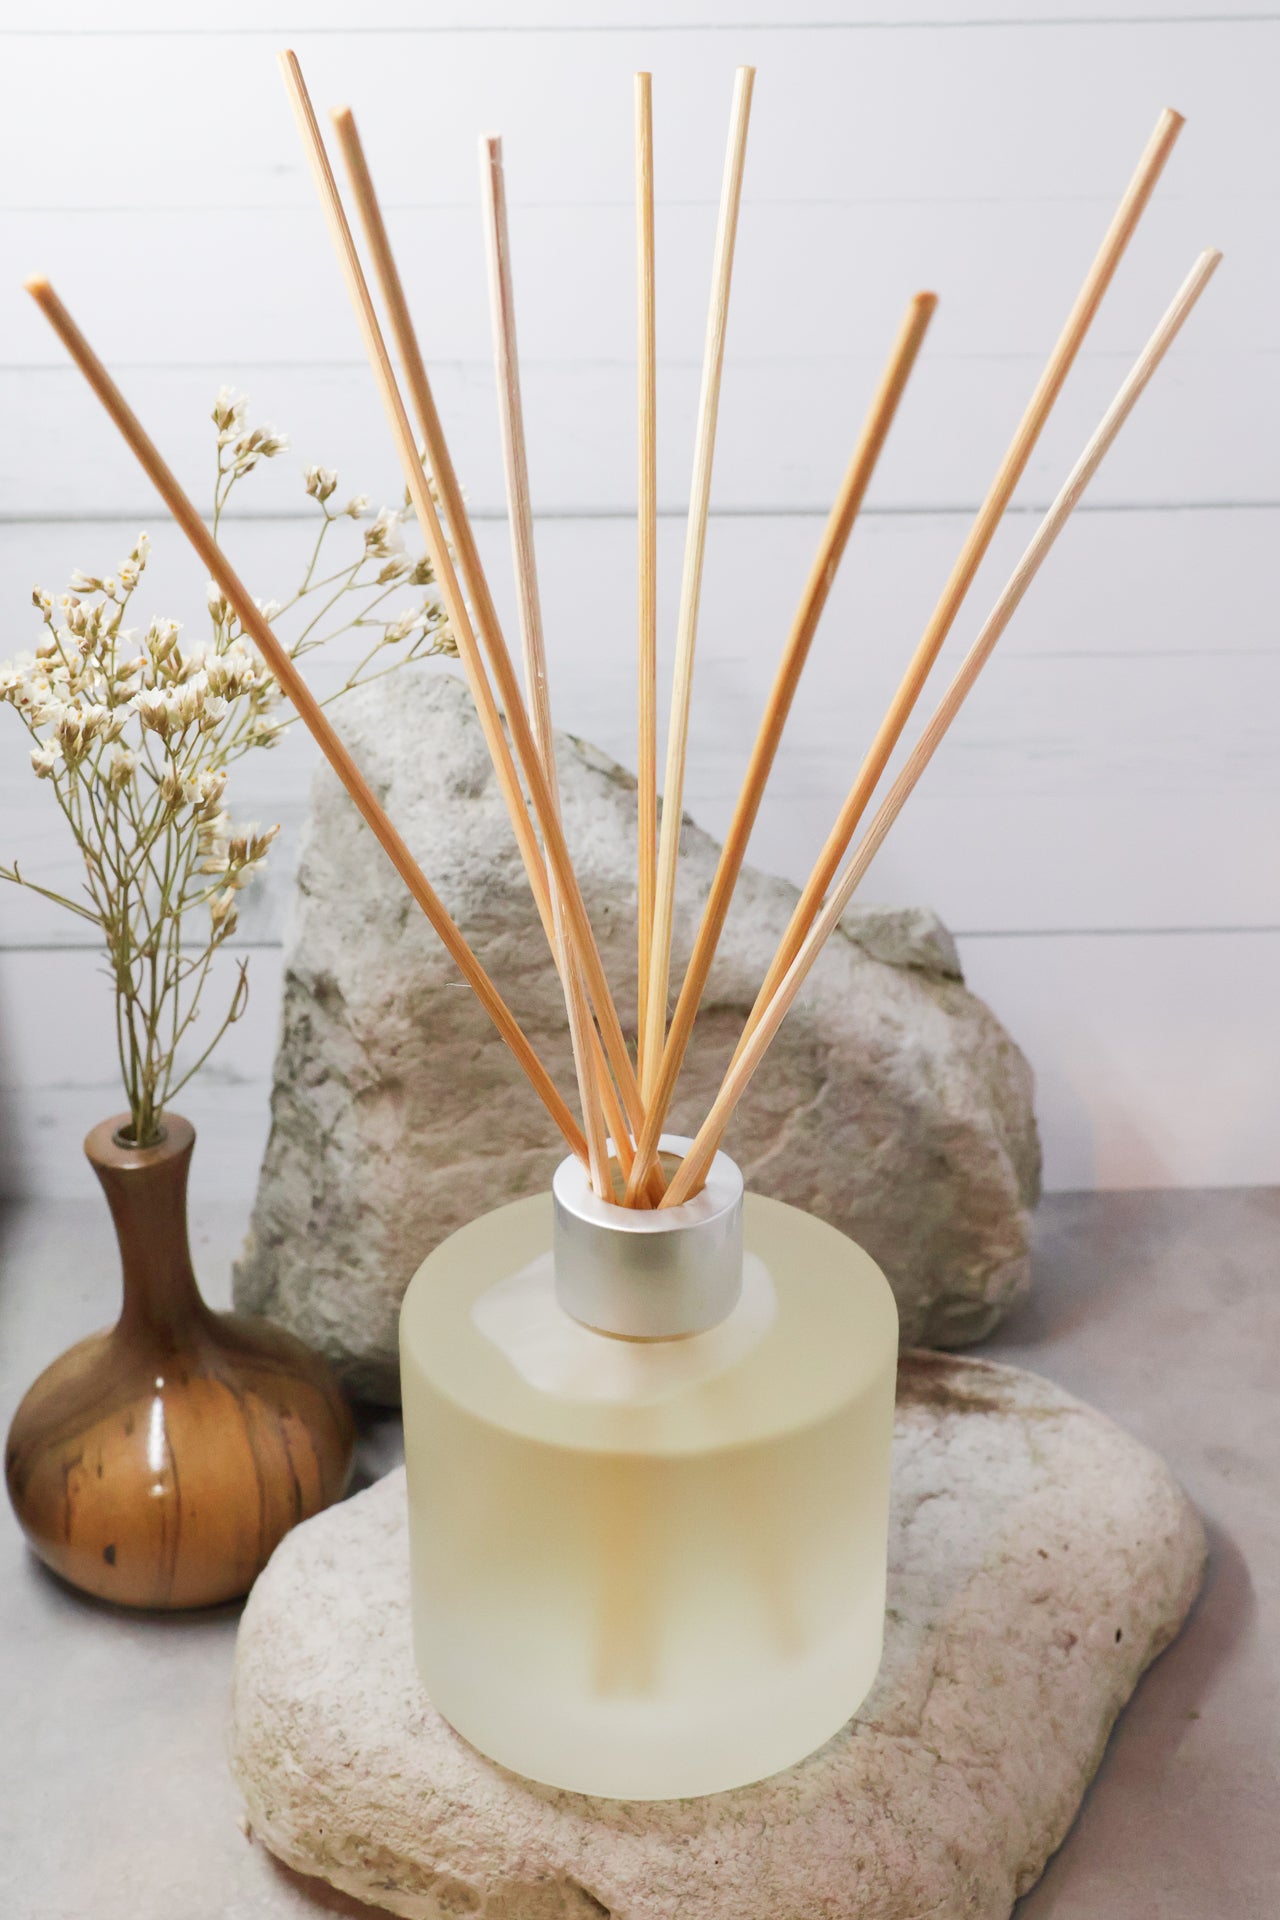 Crystal infused diffuser with wicks with the fragrance Camellia and Lotus Bloom